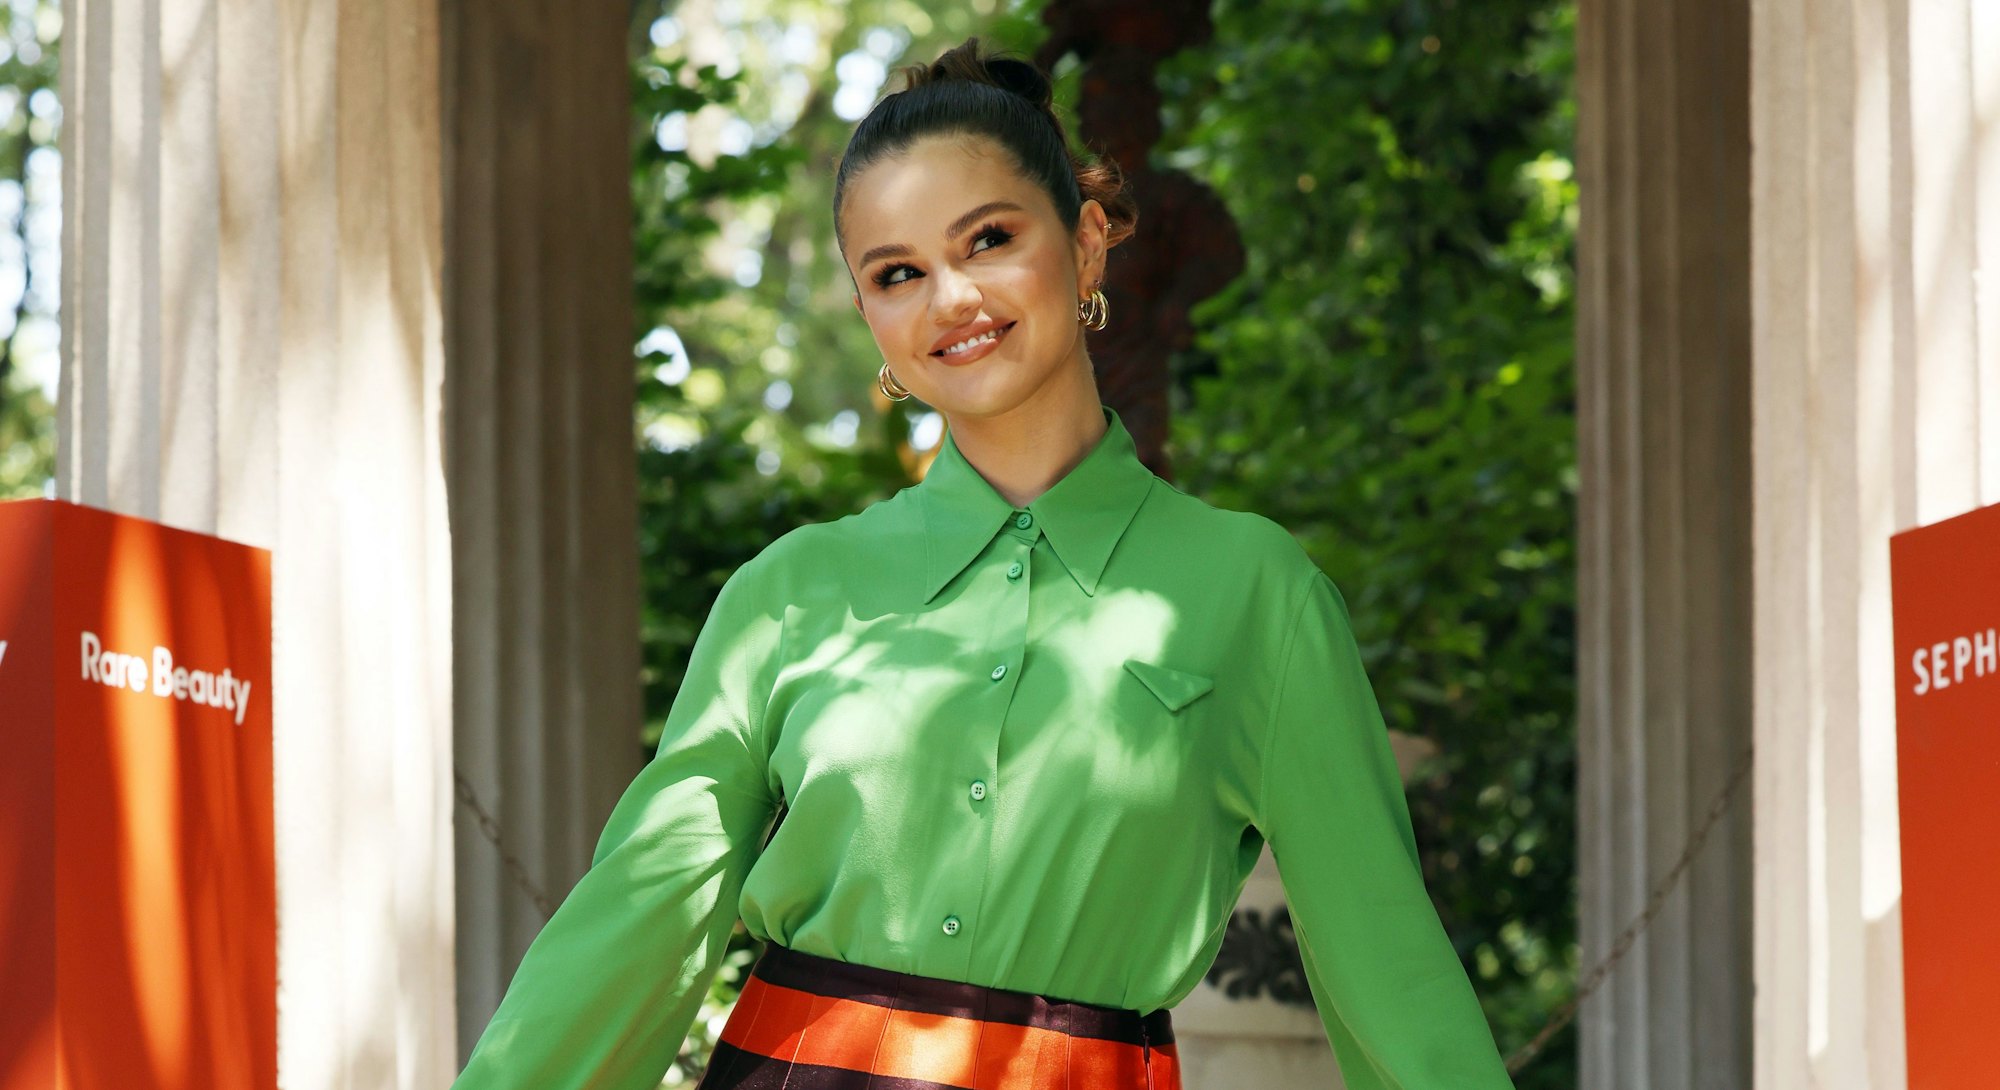 Selena Gomez's 'Only Murders In The Building' Season 2 press tour outfits have been incredibly chic.